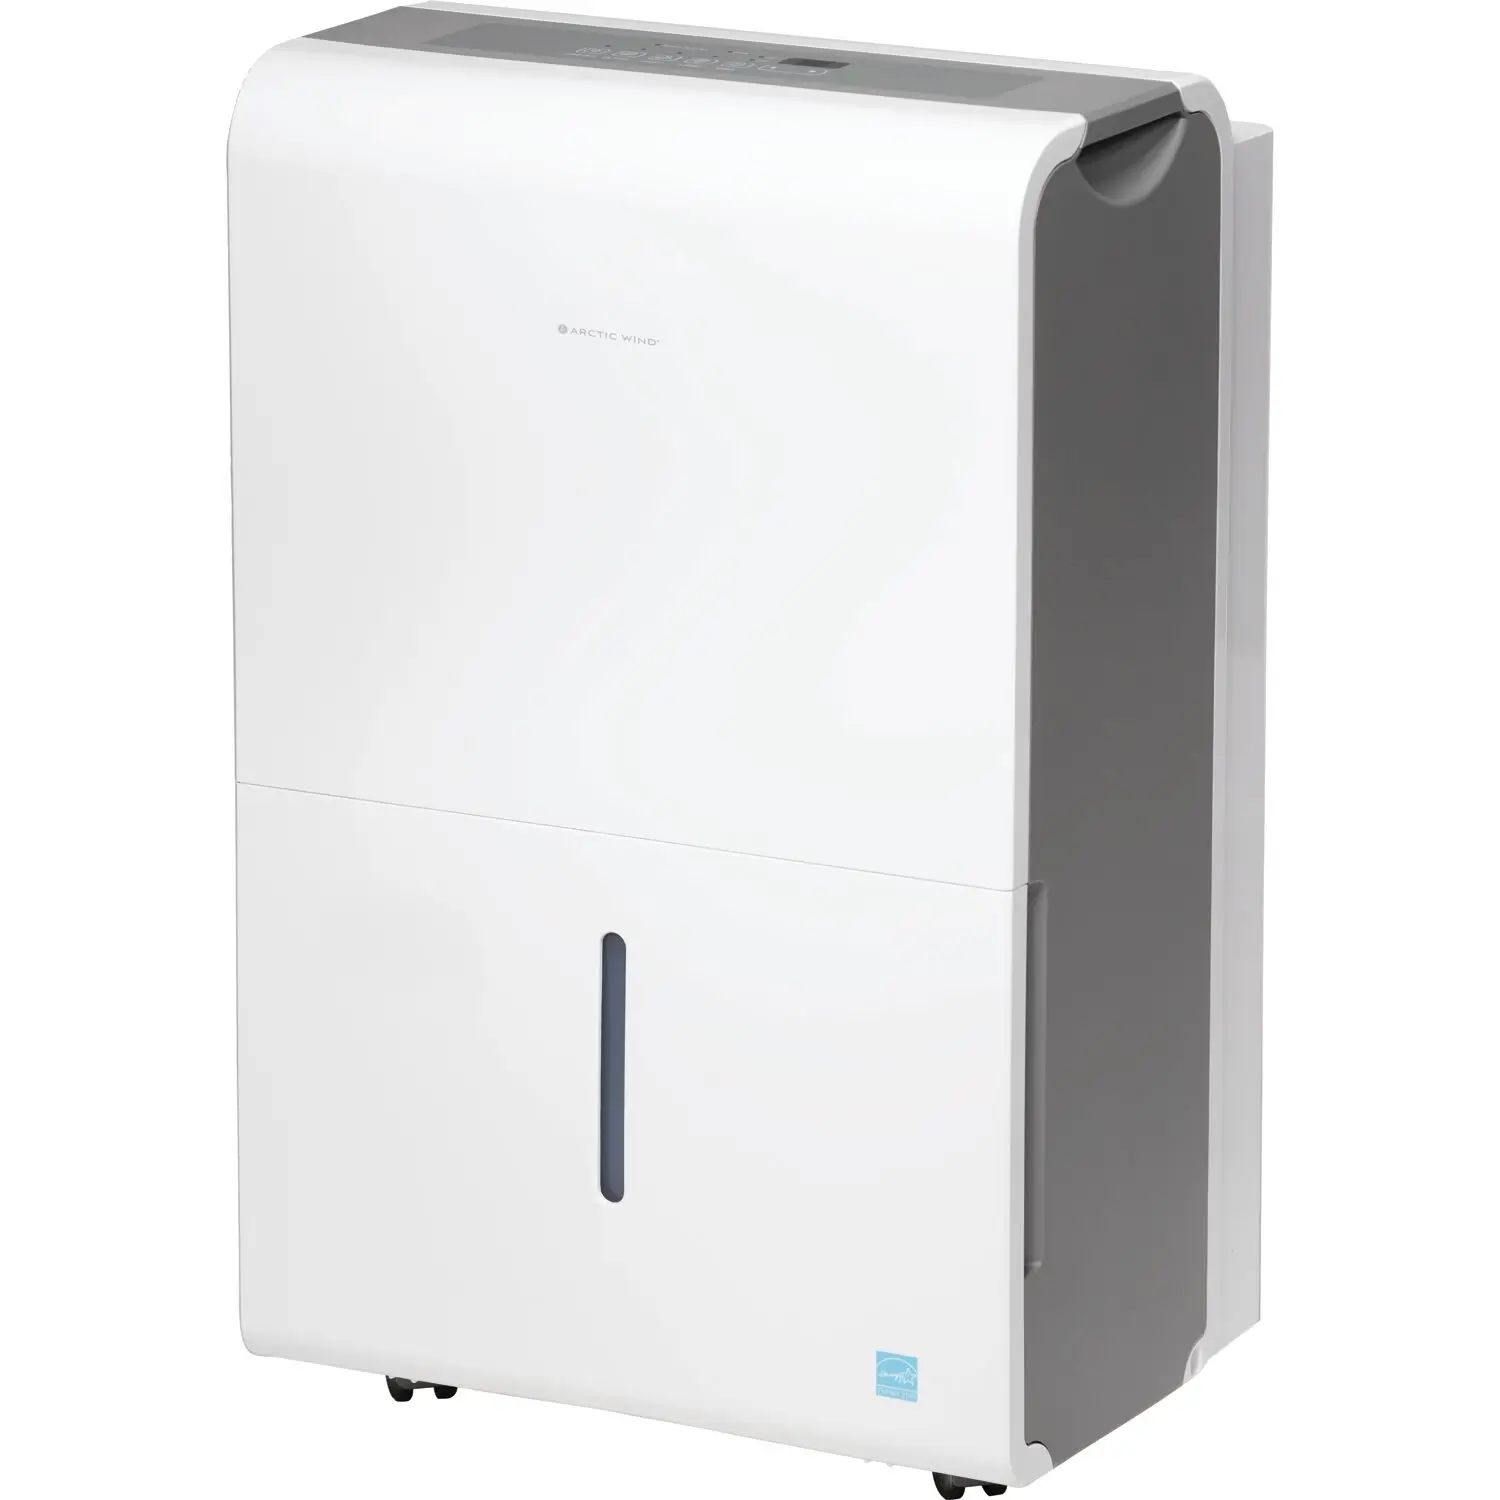 ARCTIC WIND 50 Pint Flat Panel Energy Star Dehumidifier with